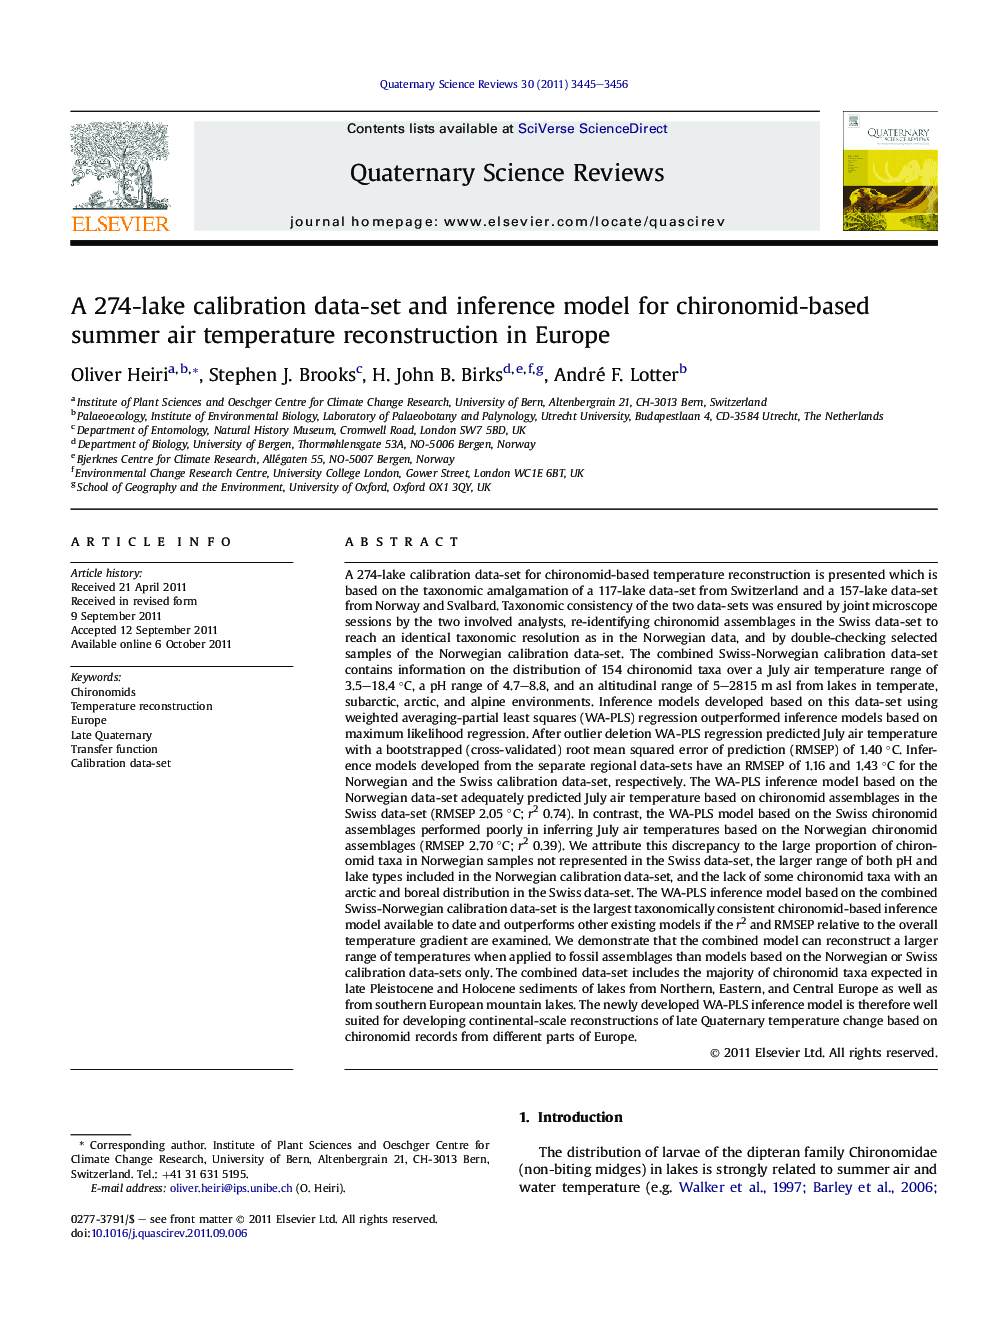 A 274-lake calibration data-set and inference model for chironomid-based summer air temperature reconstruction in Europe